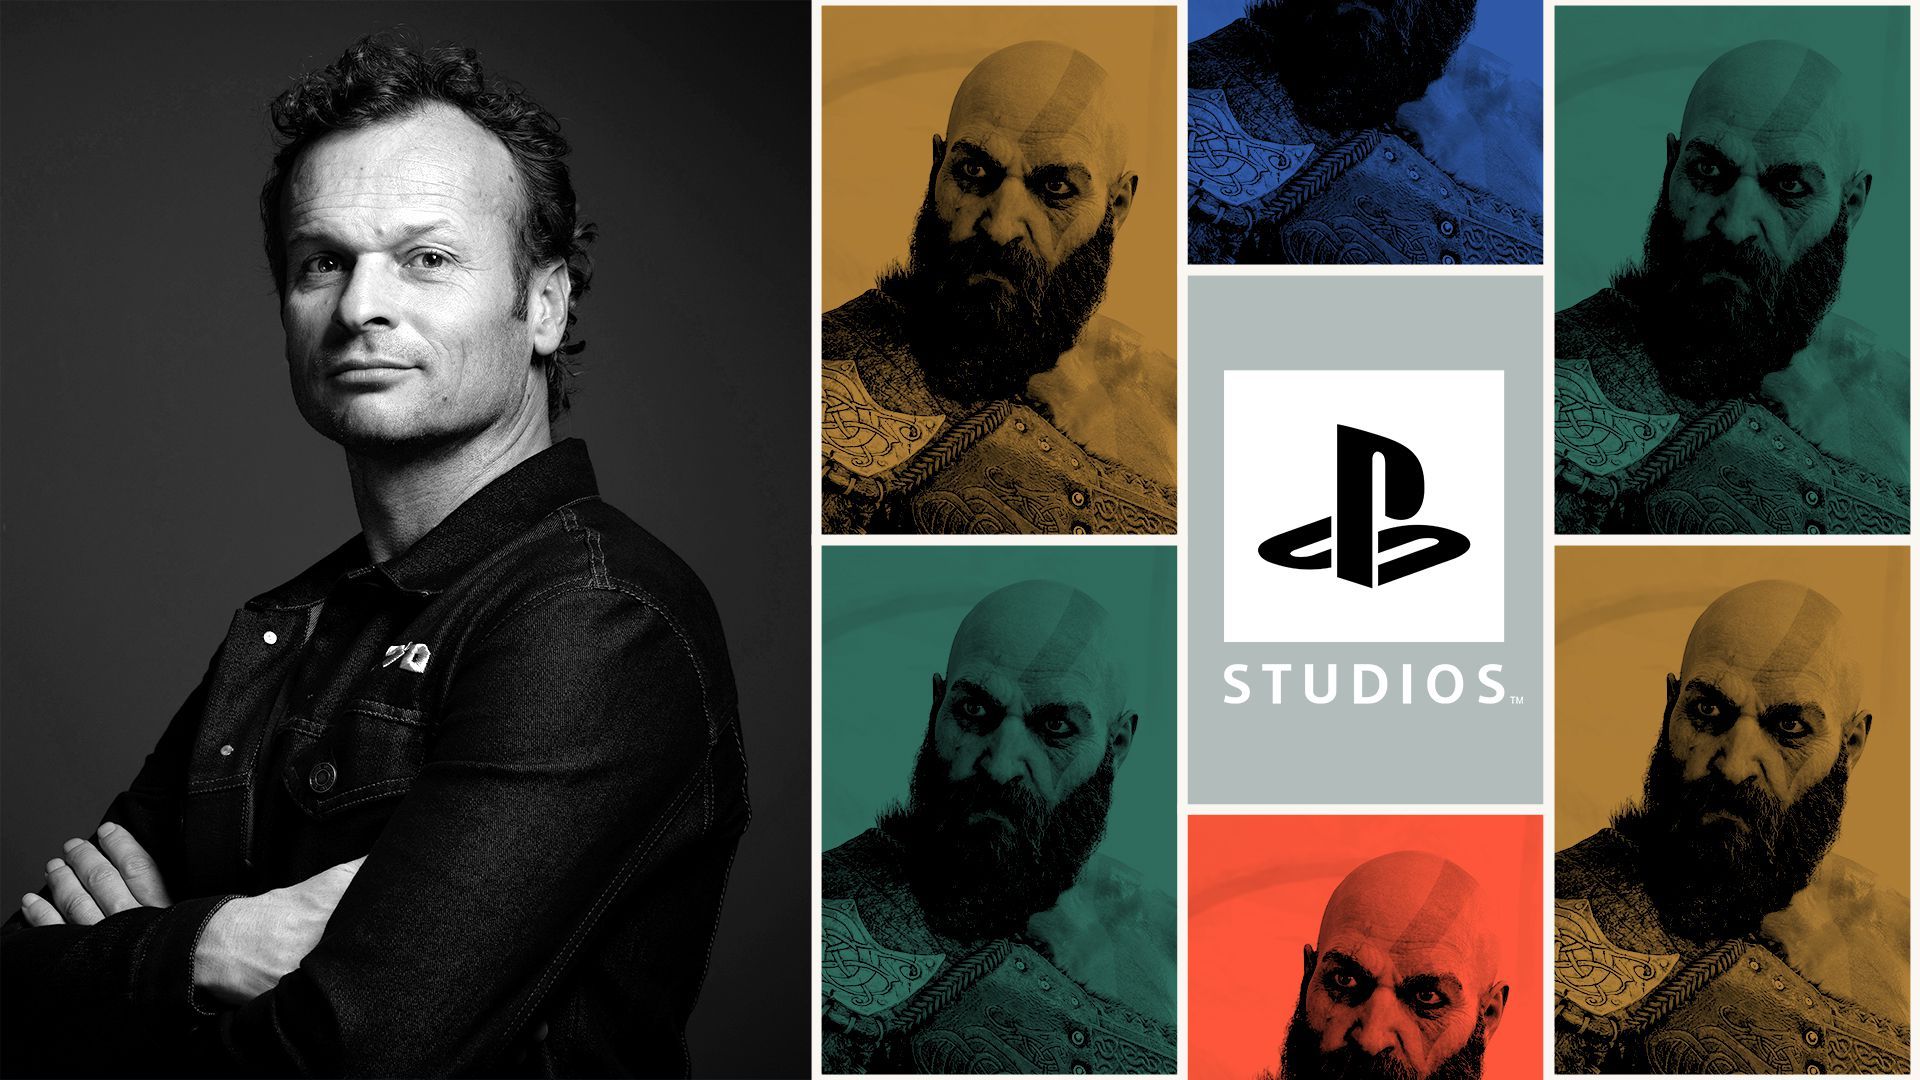 Photo illustration of Hermen Hulst next to a grid composed of the Playstation studios logo and Kratos, the main character of the God of War game.